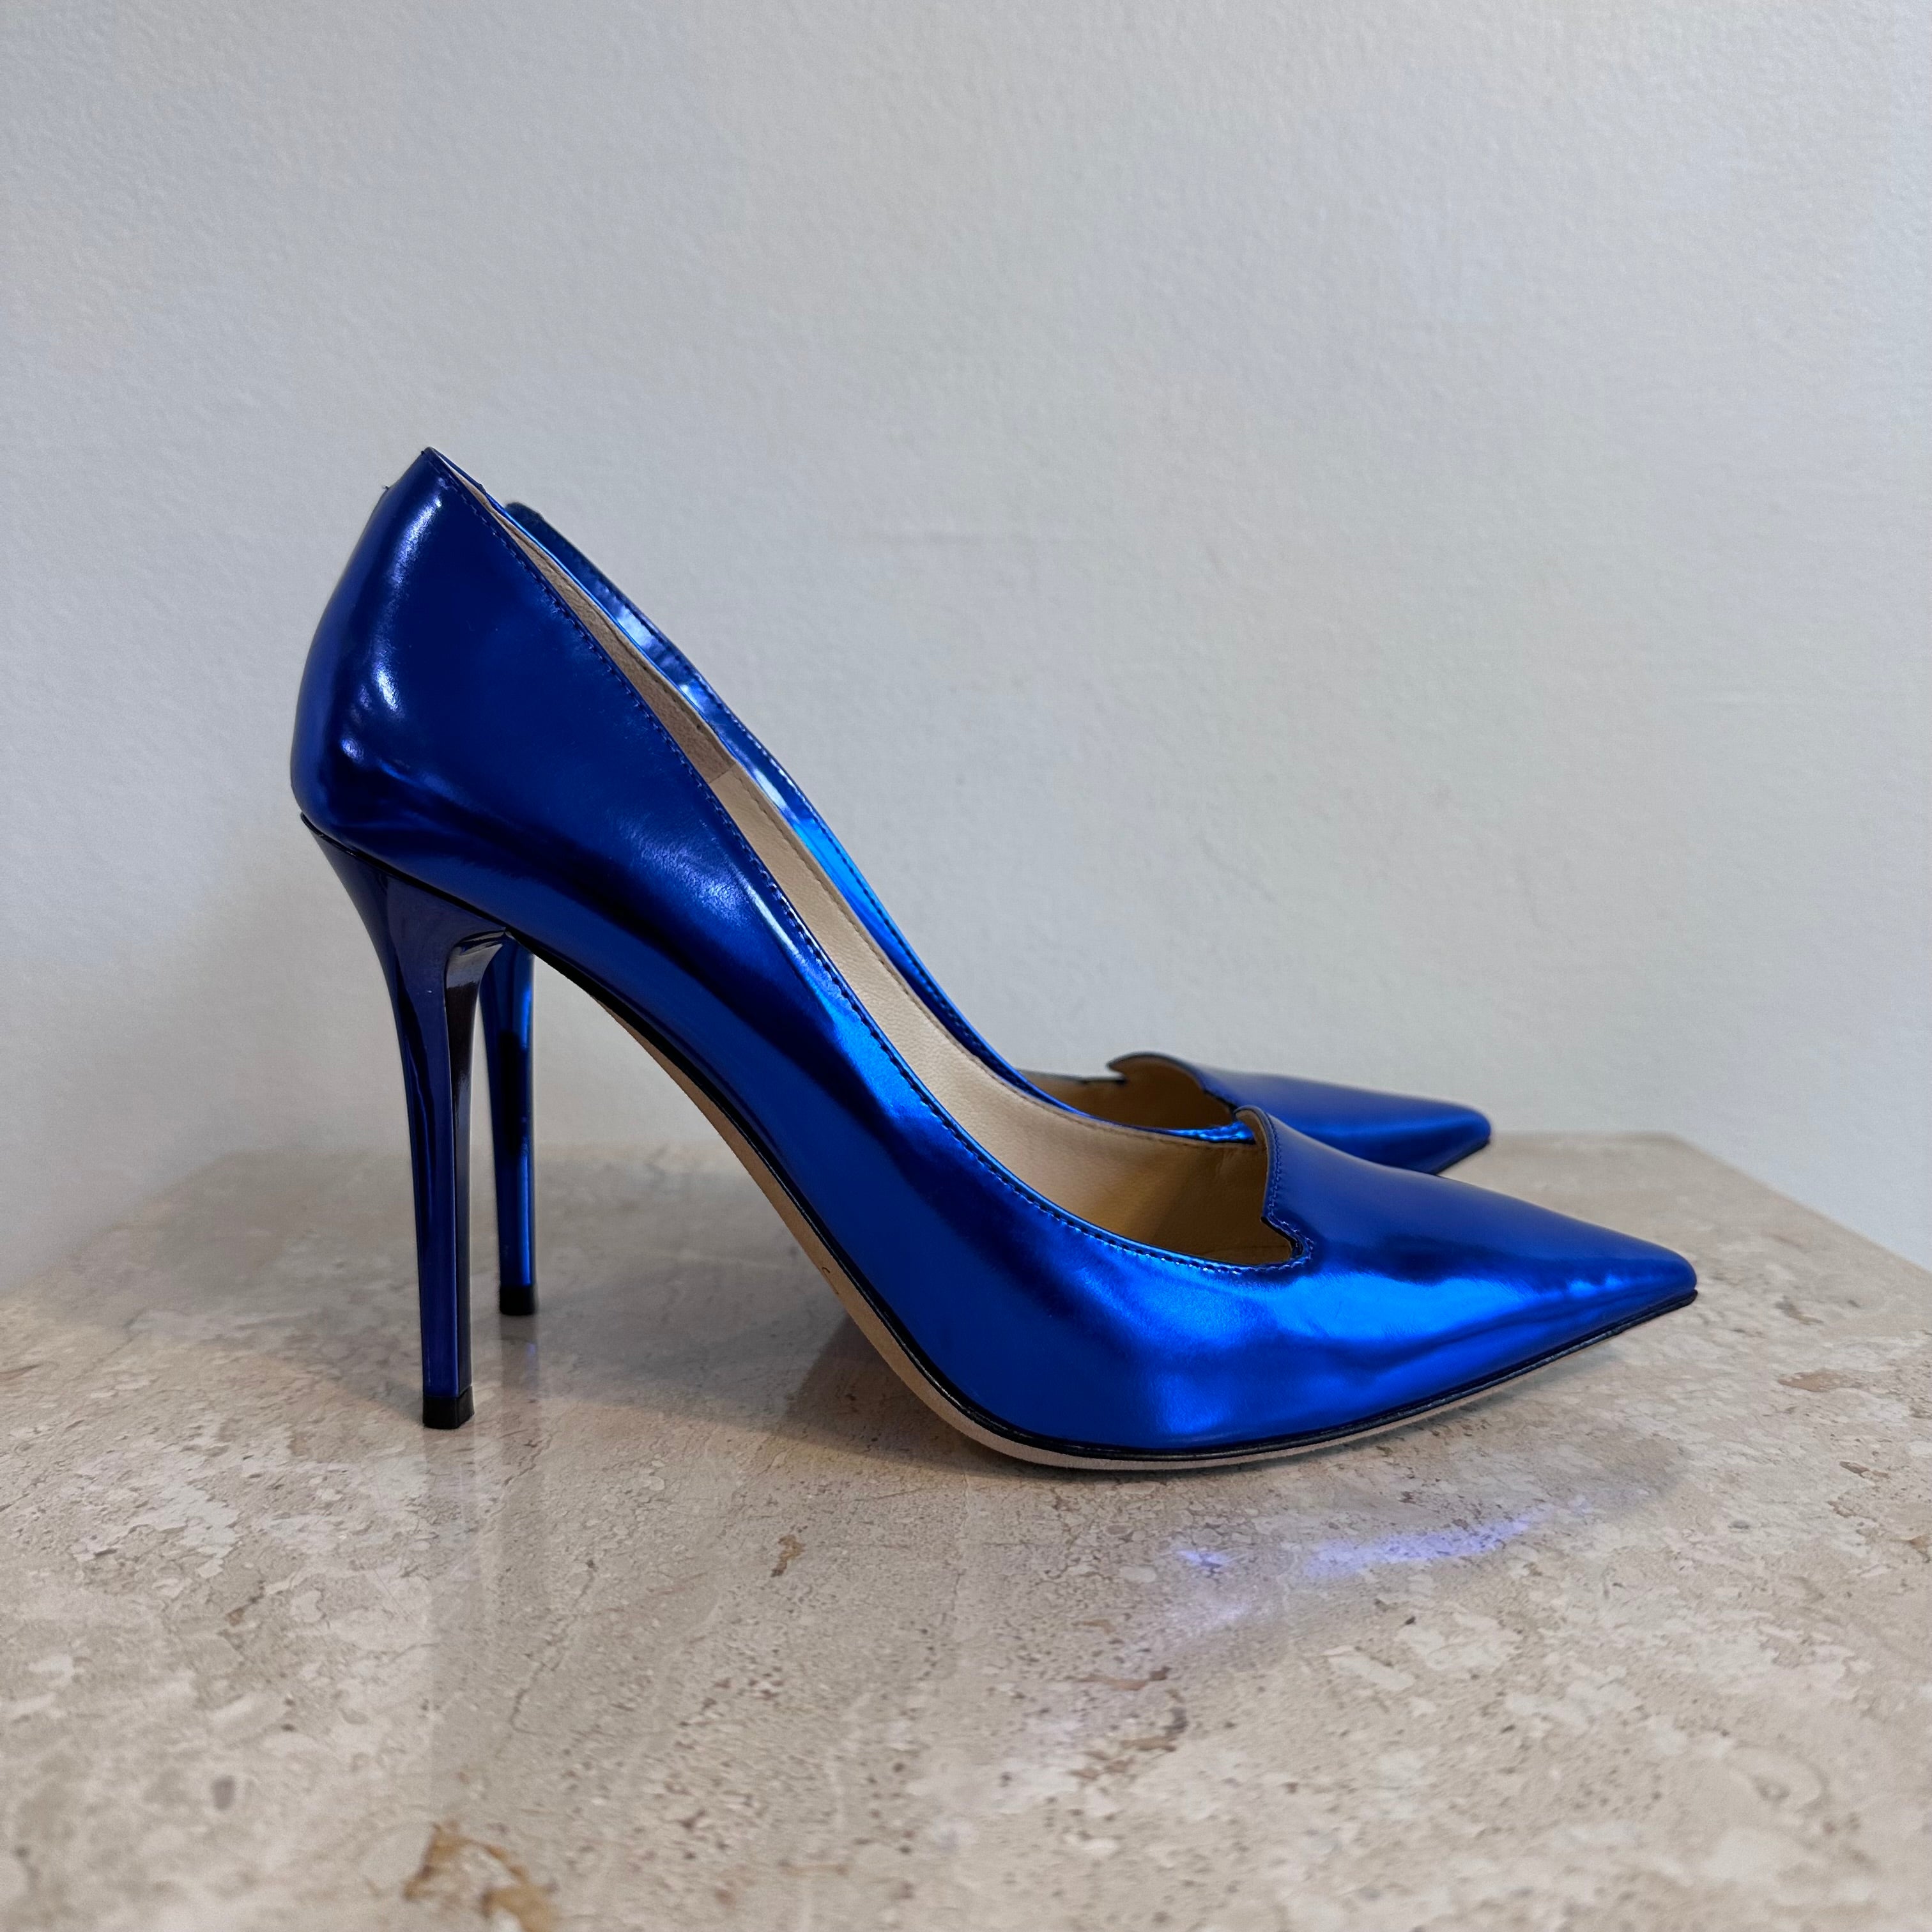 Pre-Owned JIMMY CHOO Blue Mirror Patent Avril Pointy Toe Pumps - Size 35.5